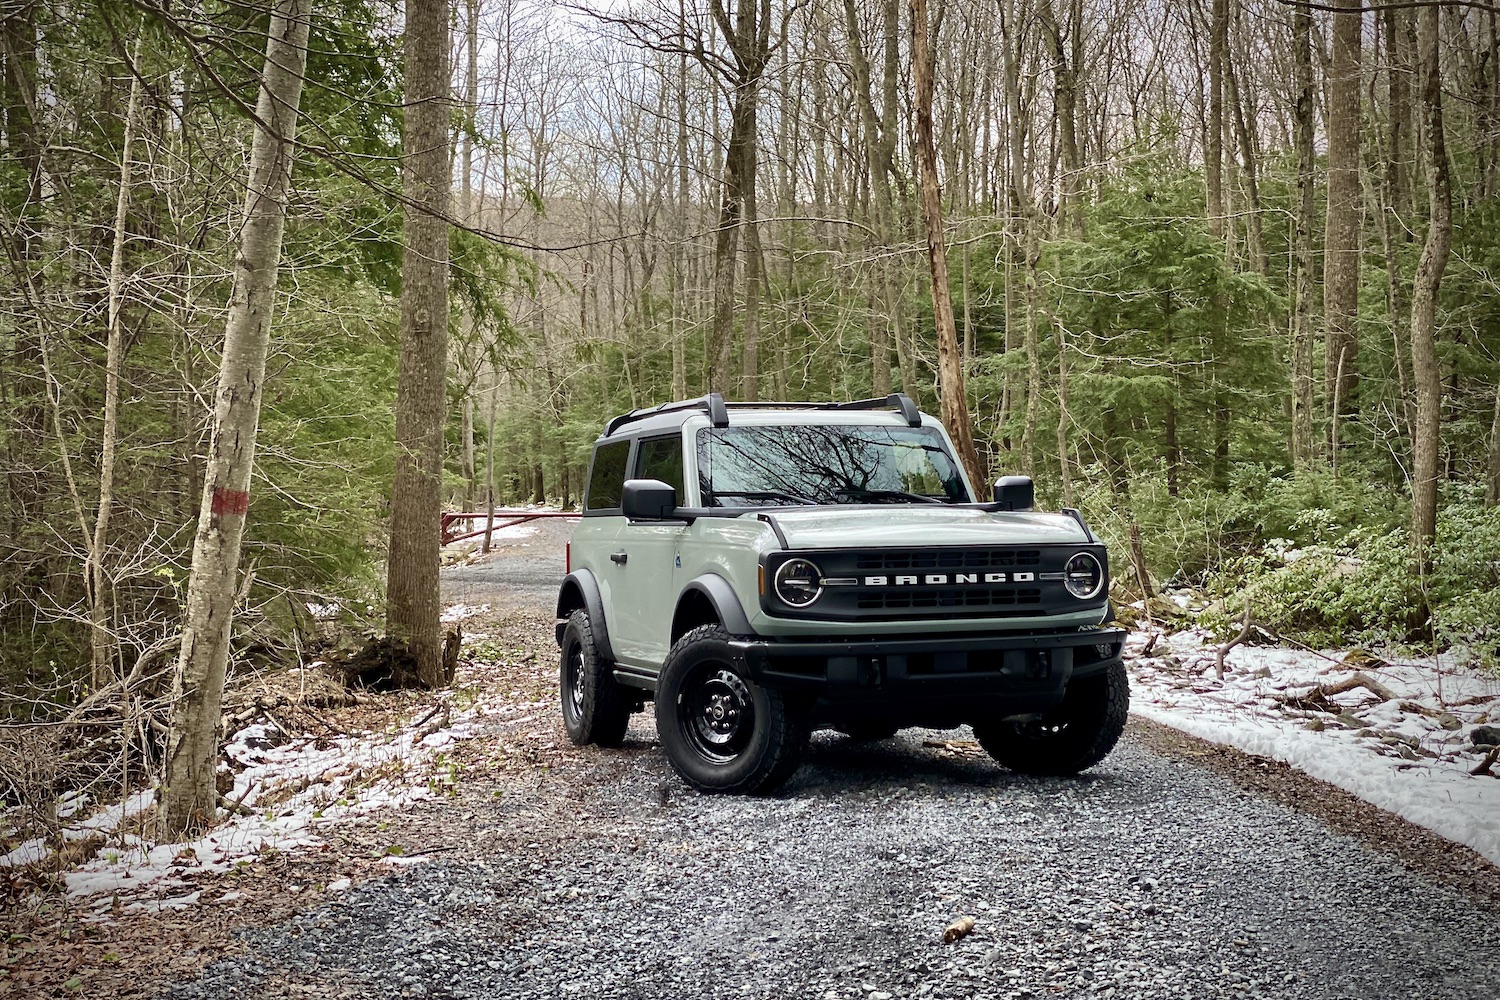 2021 Ford Bronco front end angle from passenger side on a gravel road in front of bare trees on a gravel trail.